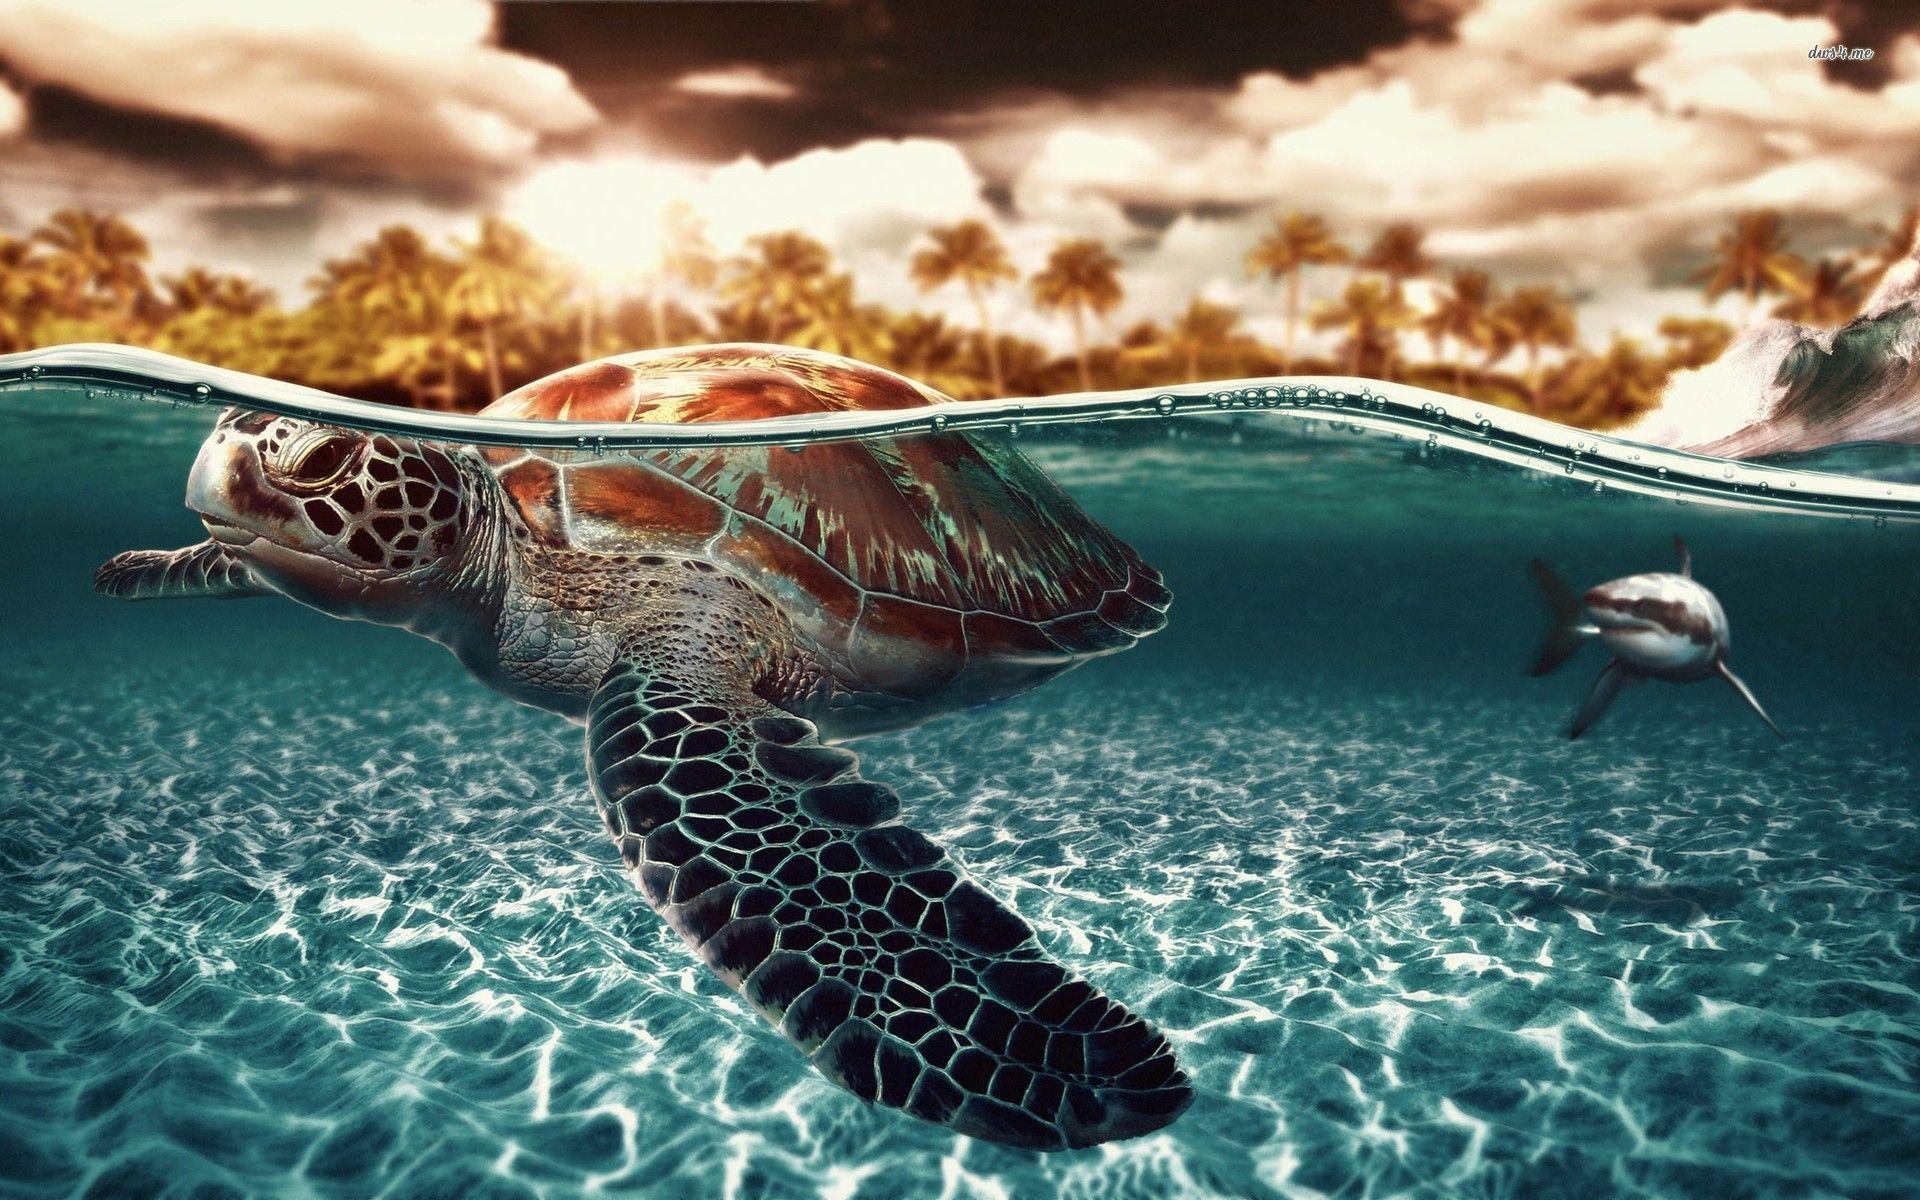 Cute Turtle Wallpaper For iPhone 6 Plus